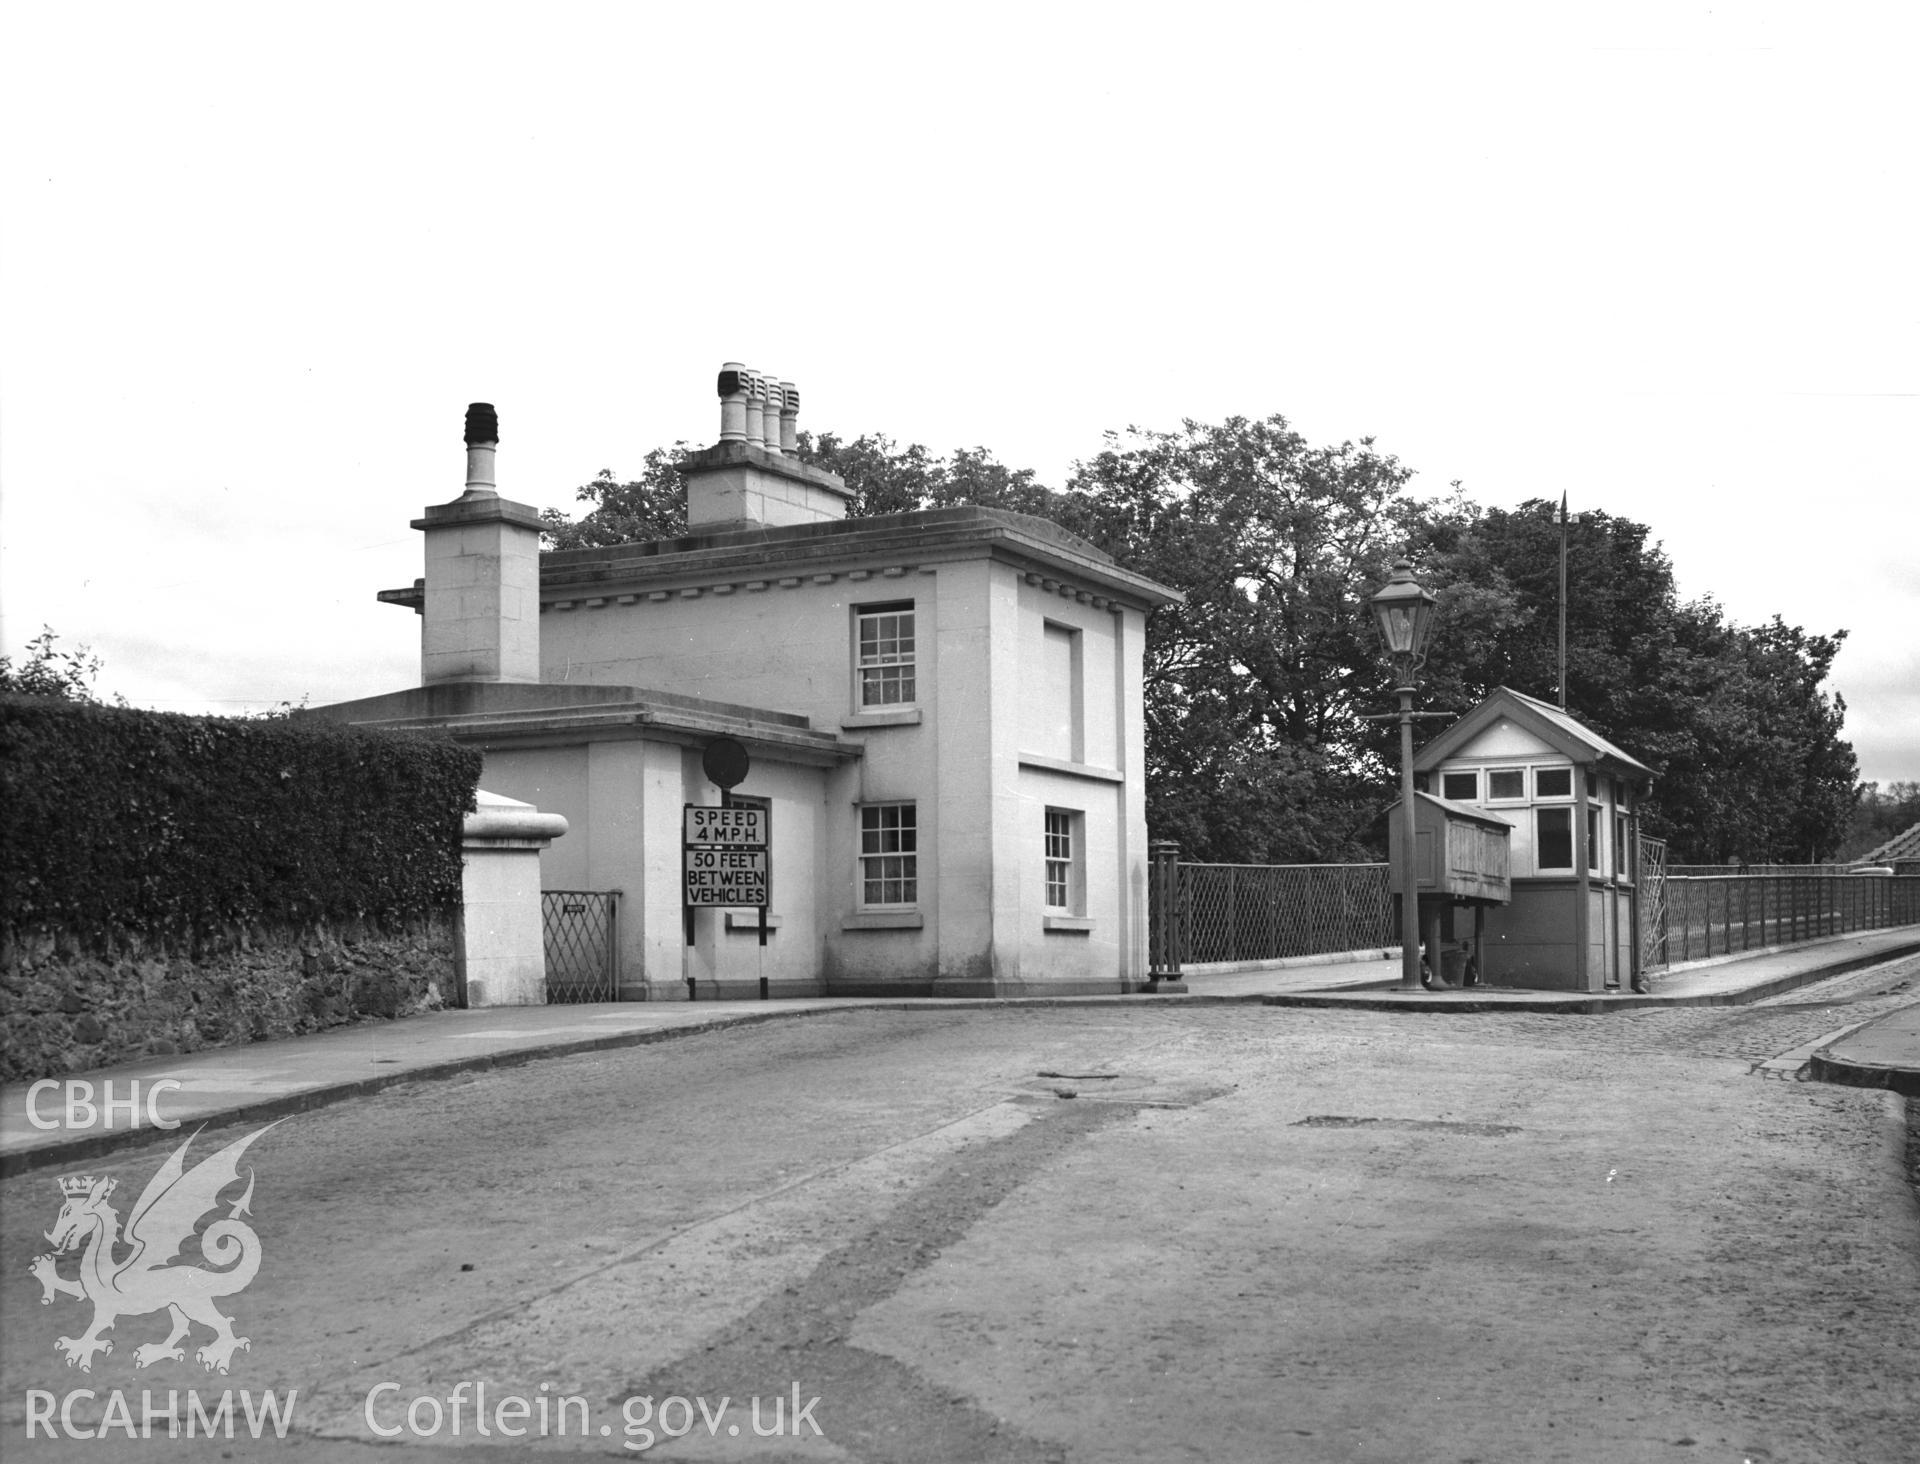 Digitised copy of a black and white negative showing the Toll House at Menai Suspension Bridge, produced by RCAHMW, before 1960.